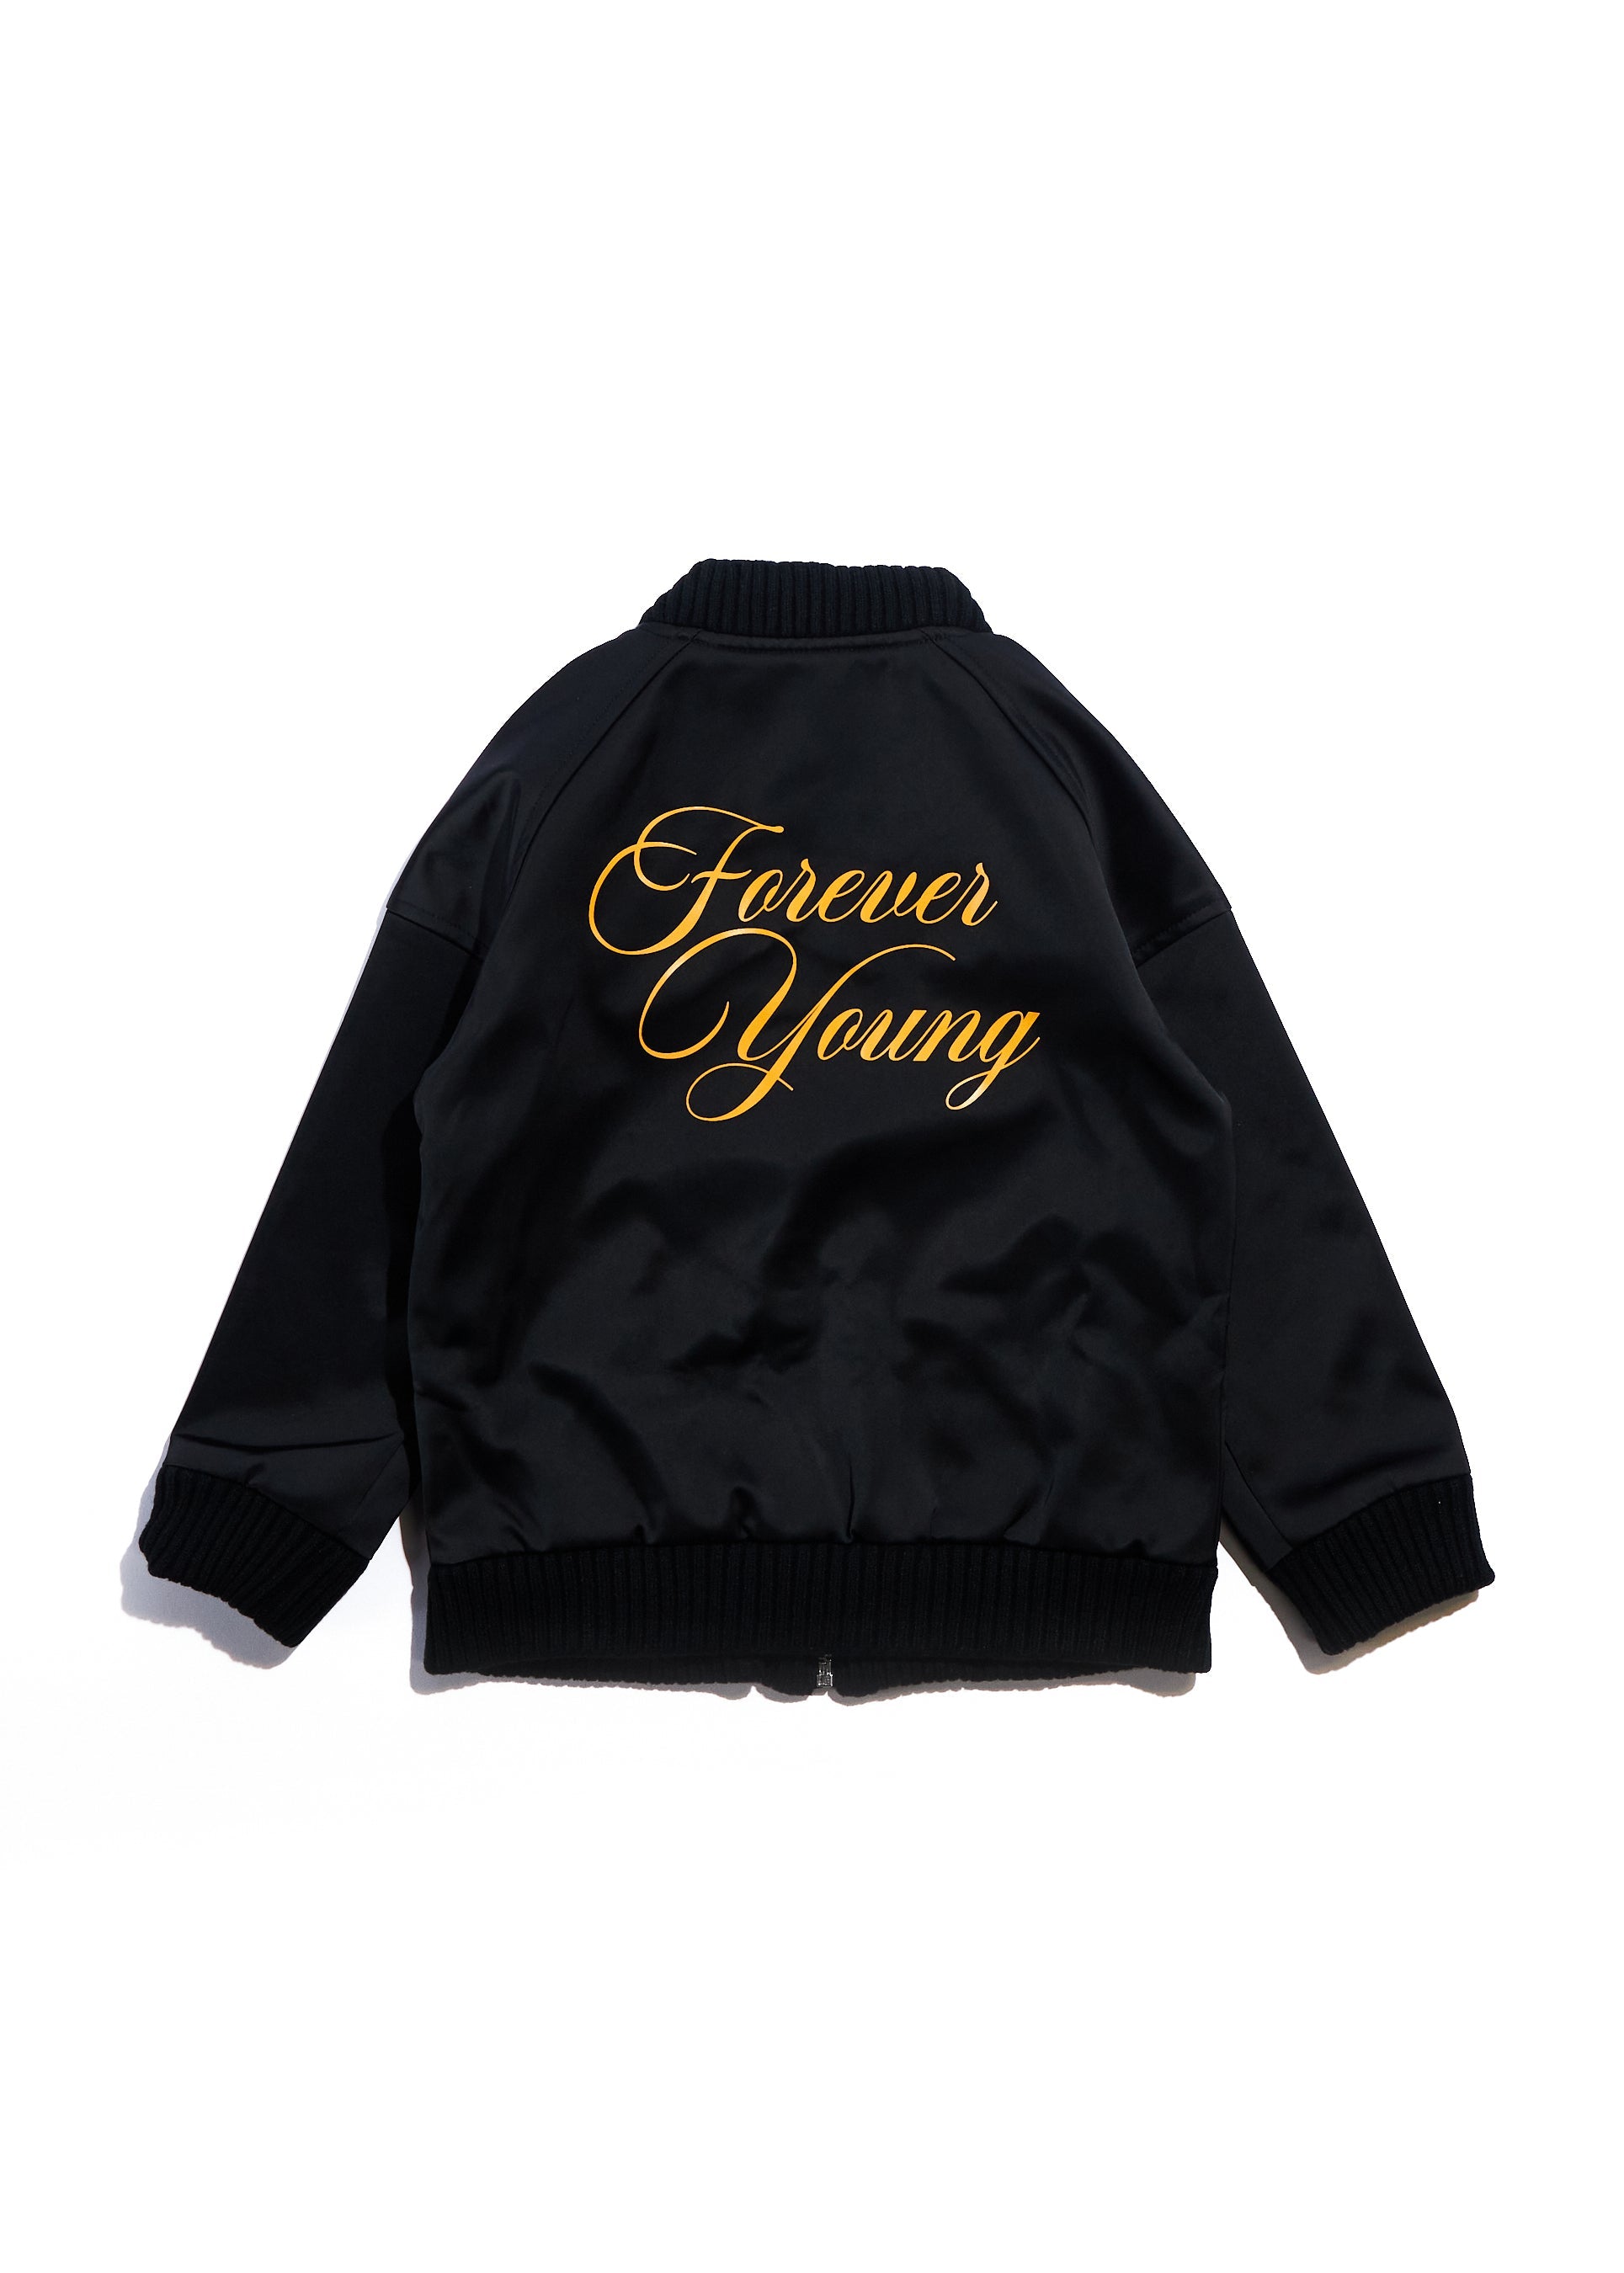 Darcey Bomber Jacket Outerwear Haus of JR 